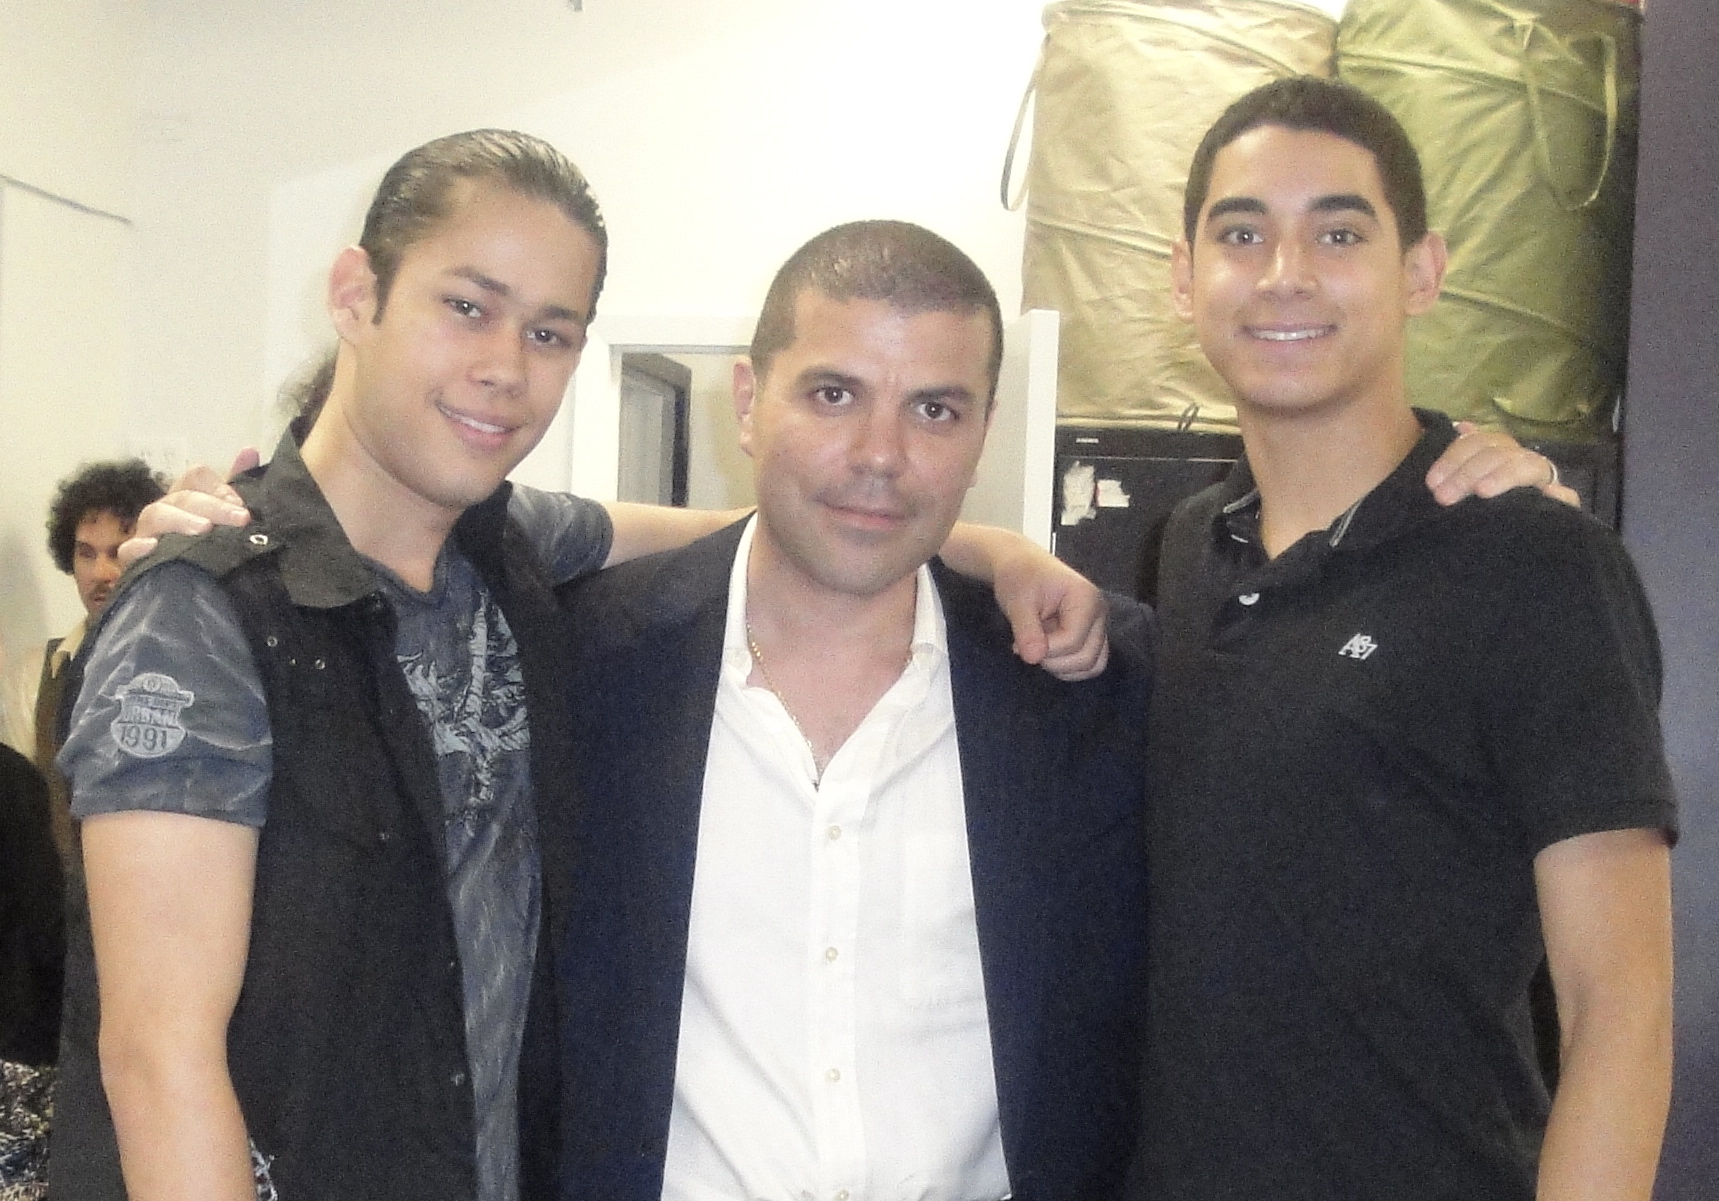 With Raymi Gonzales on the left, and Nicolas Salgado on the right.